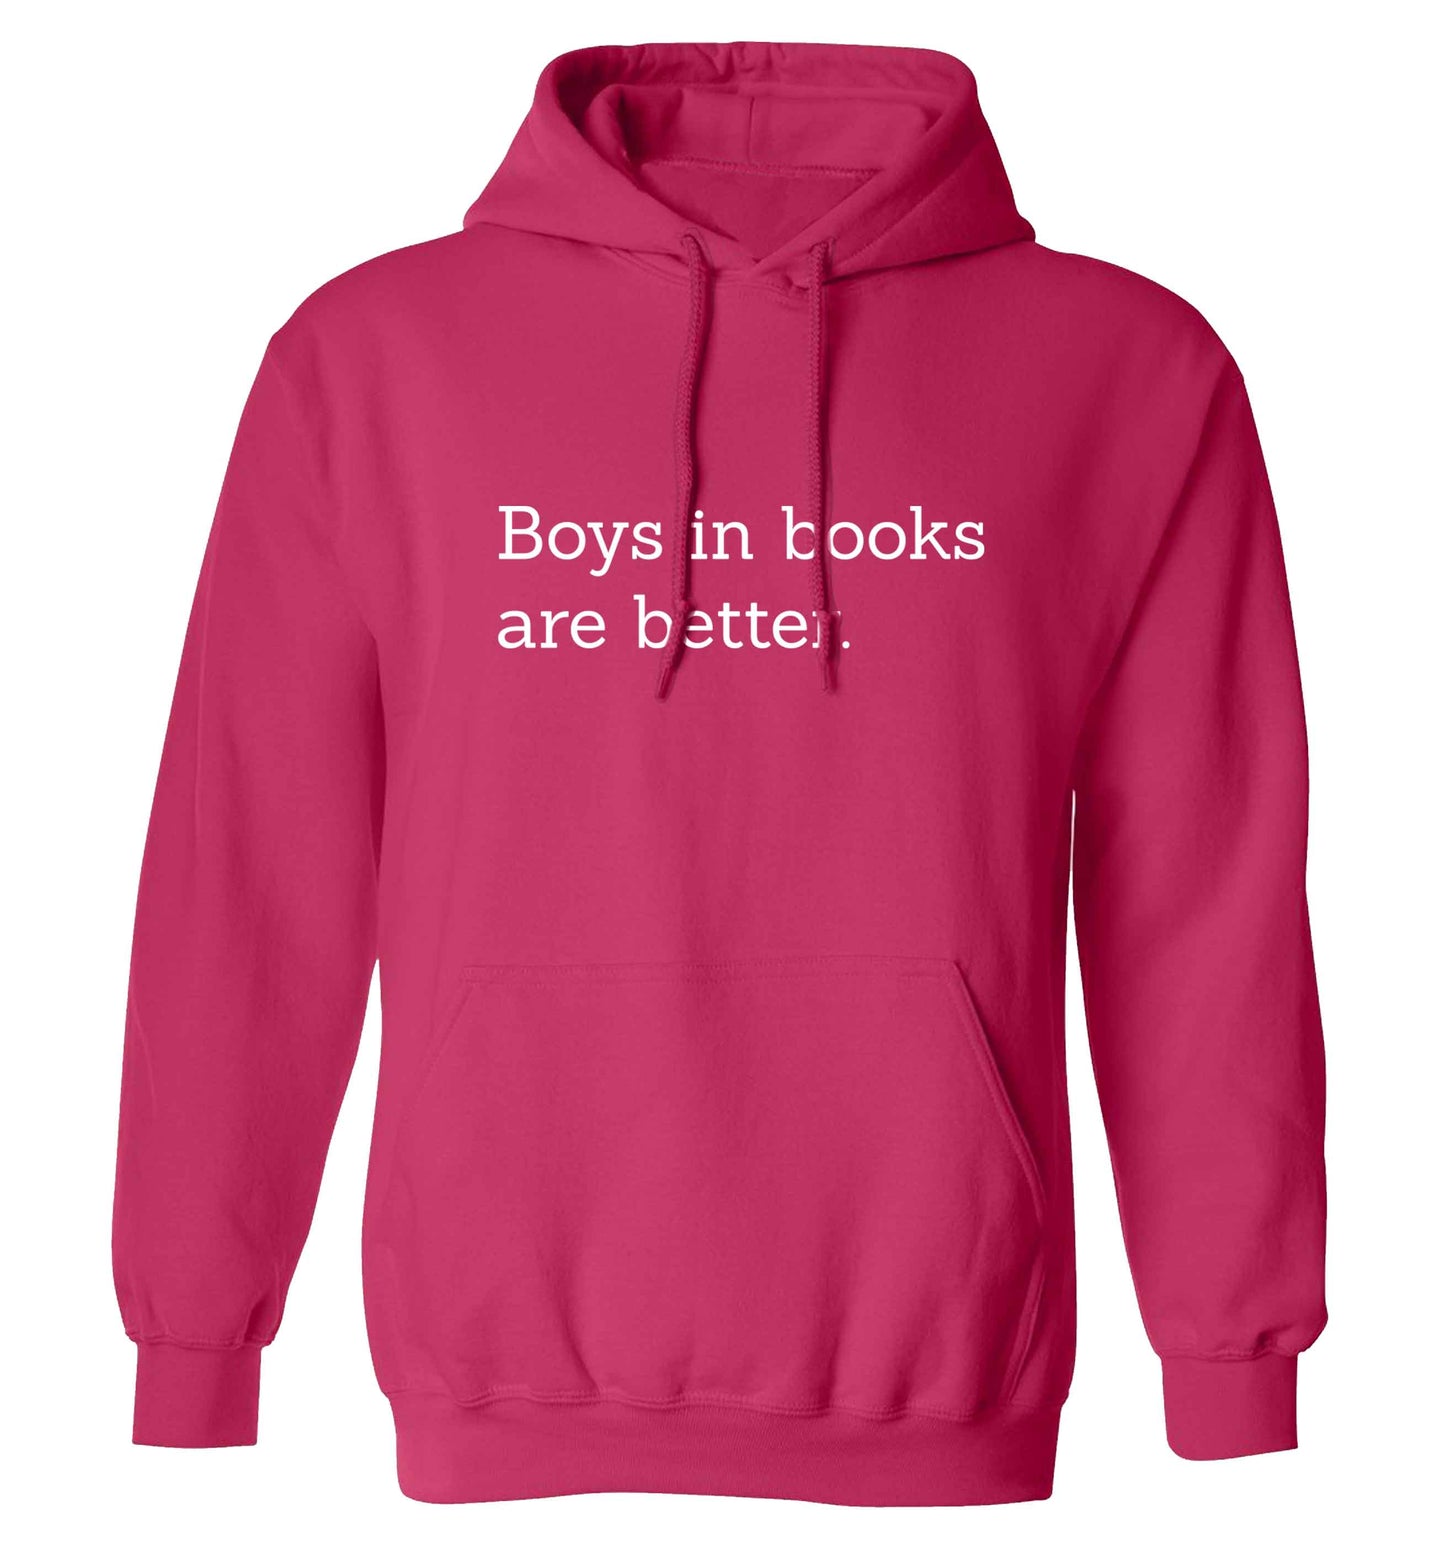 Boys in books are better adults unisex pink hoodie 2XL